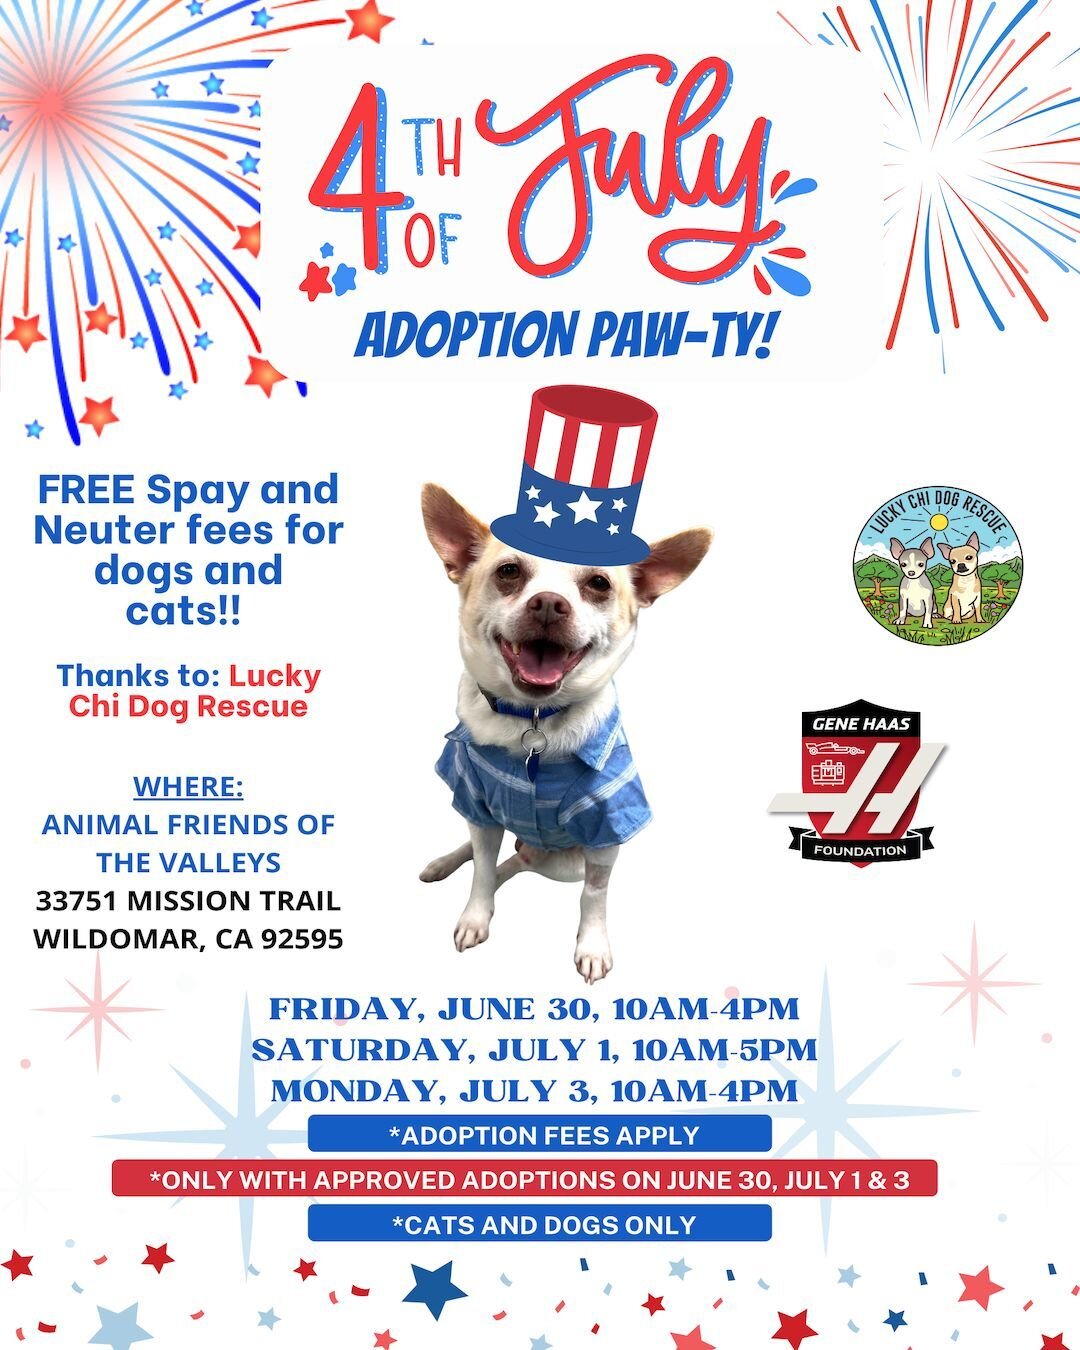 Come join the PAW-TY! Lucky Chi Dog Rescue is sponsoring FREE Spay and Neuter for cats and dogs adopted from Animal Friends of the Valleys. 
*Adoption Fees Still Apply